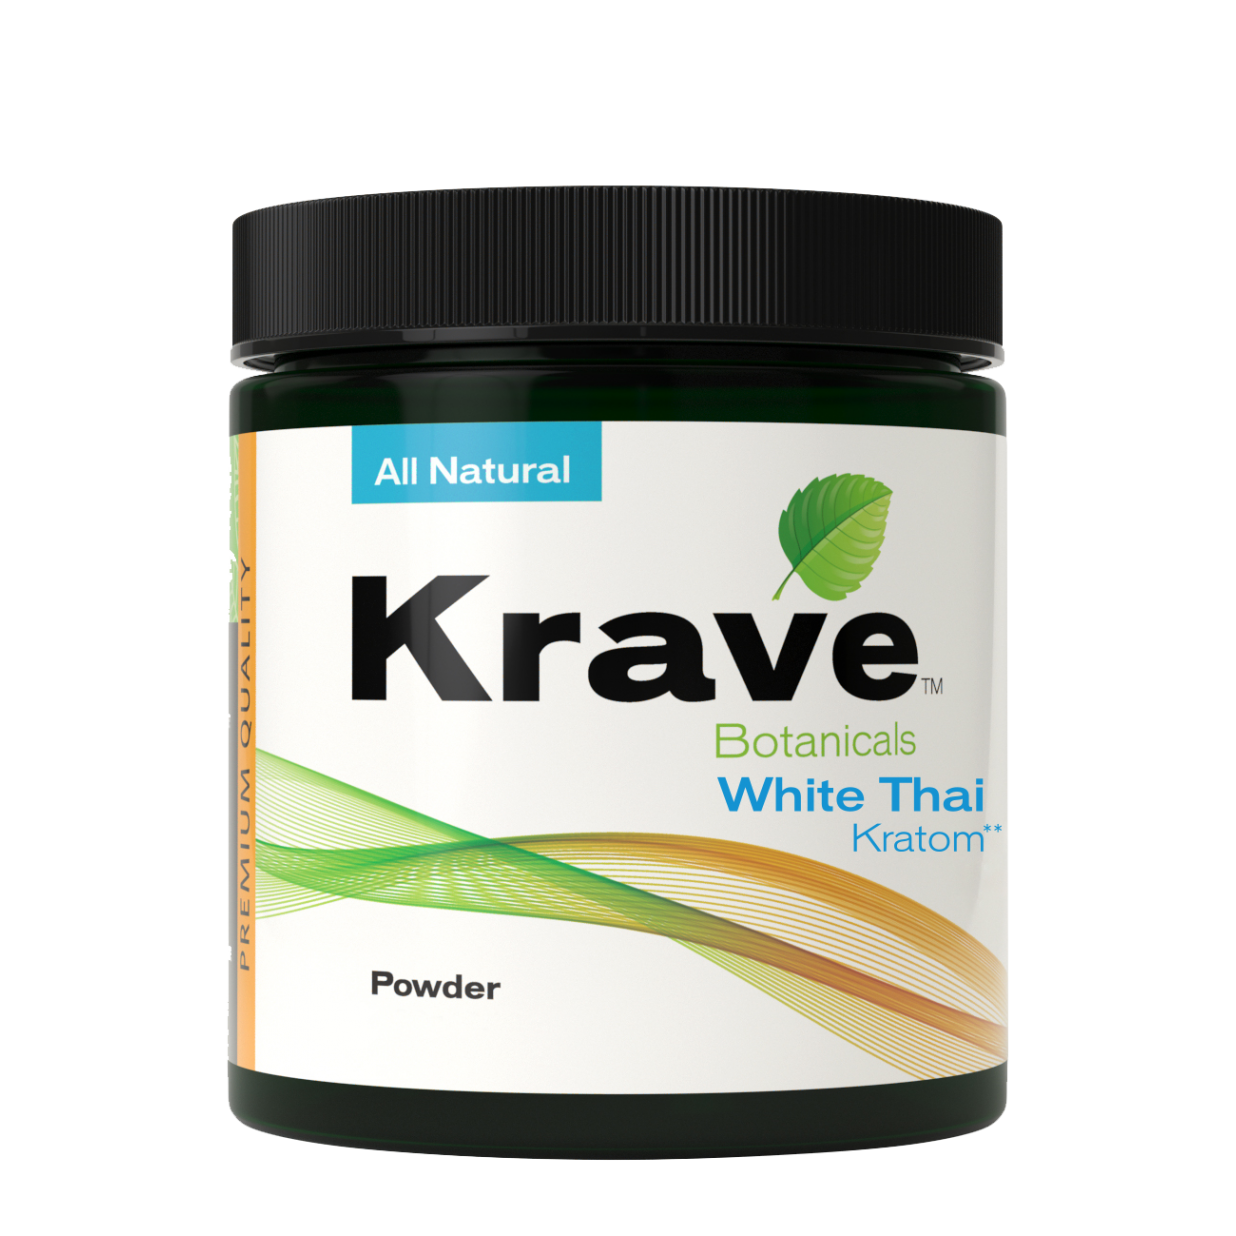 Krave Botanicals brings you 100% pure and authentic White Thai Kratom Powde...